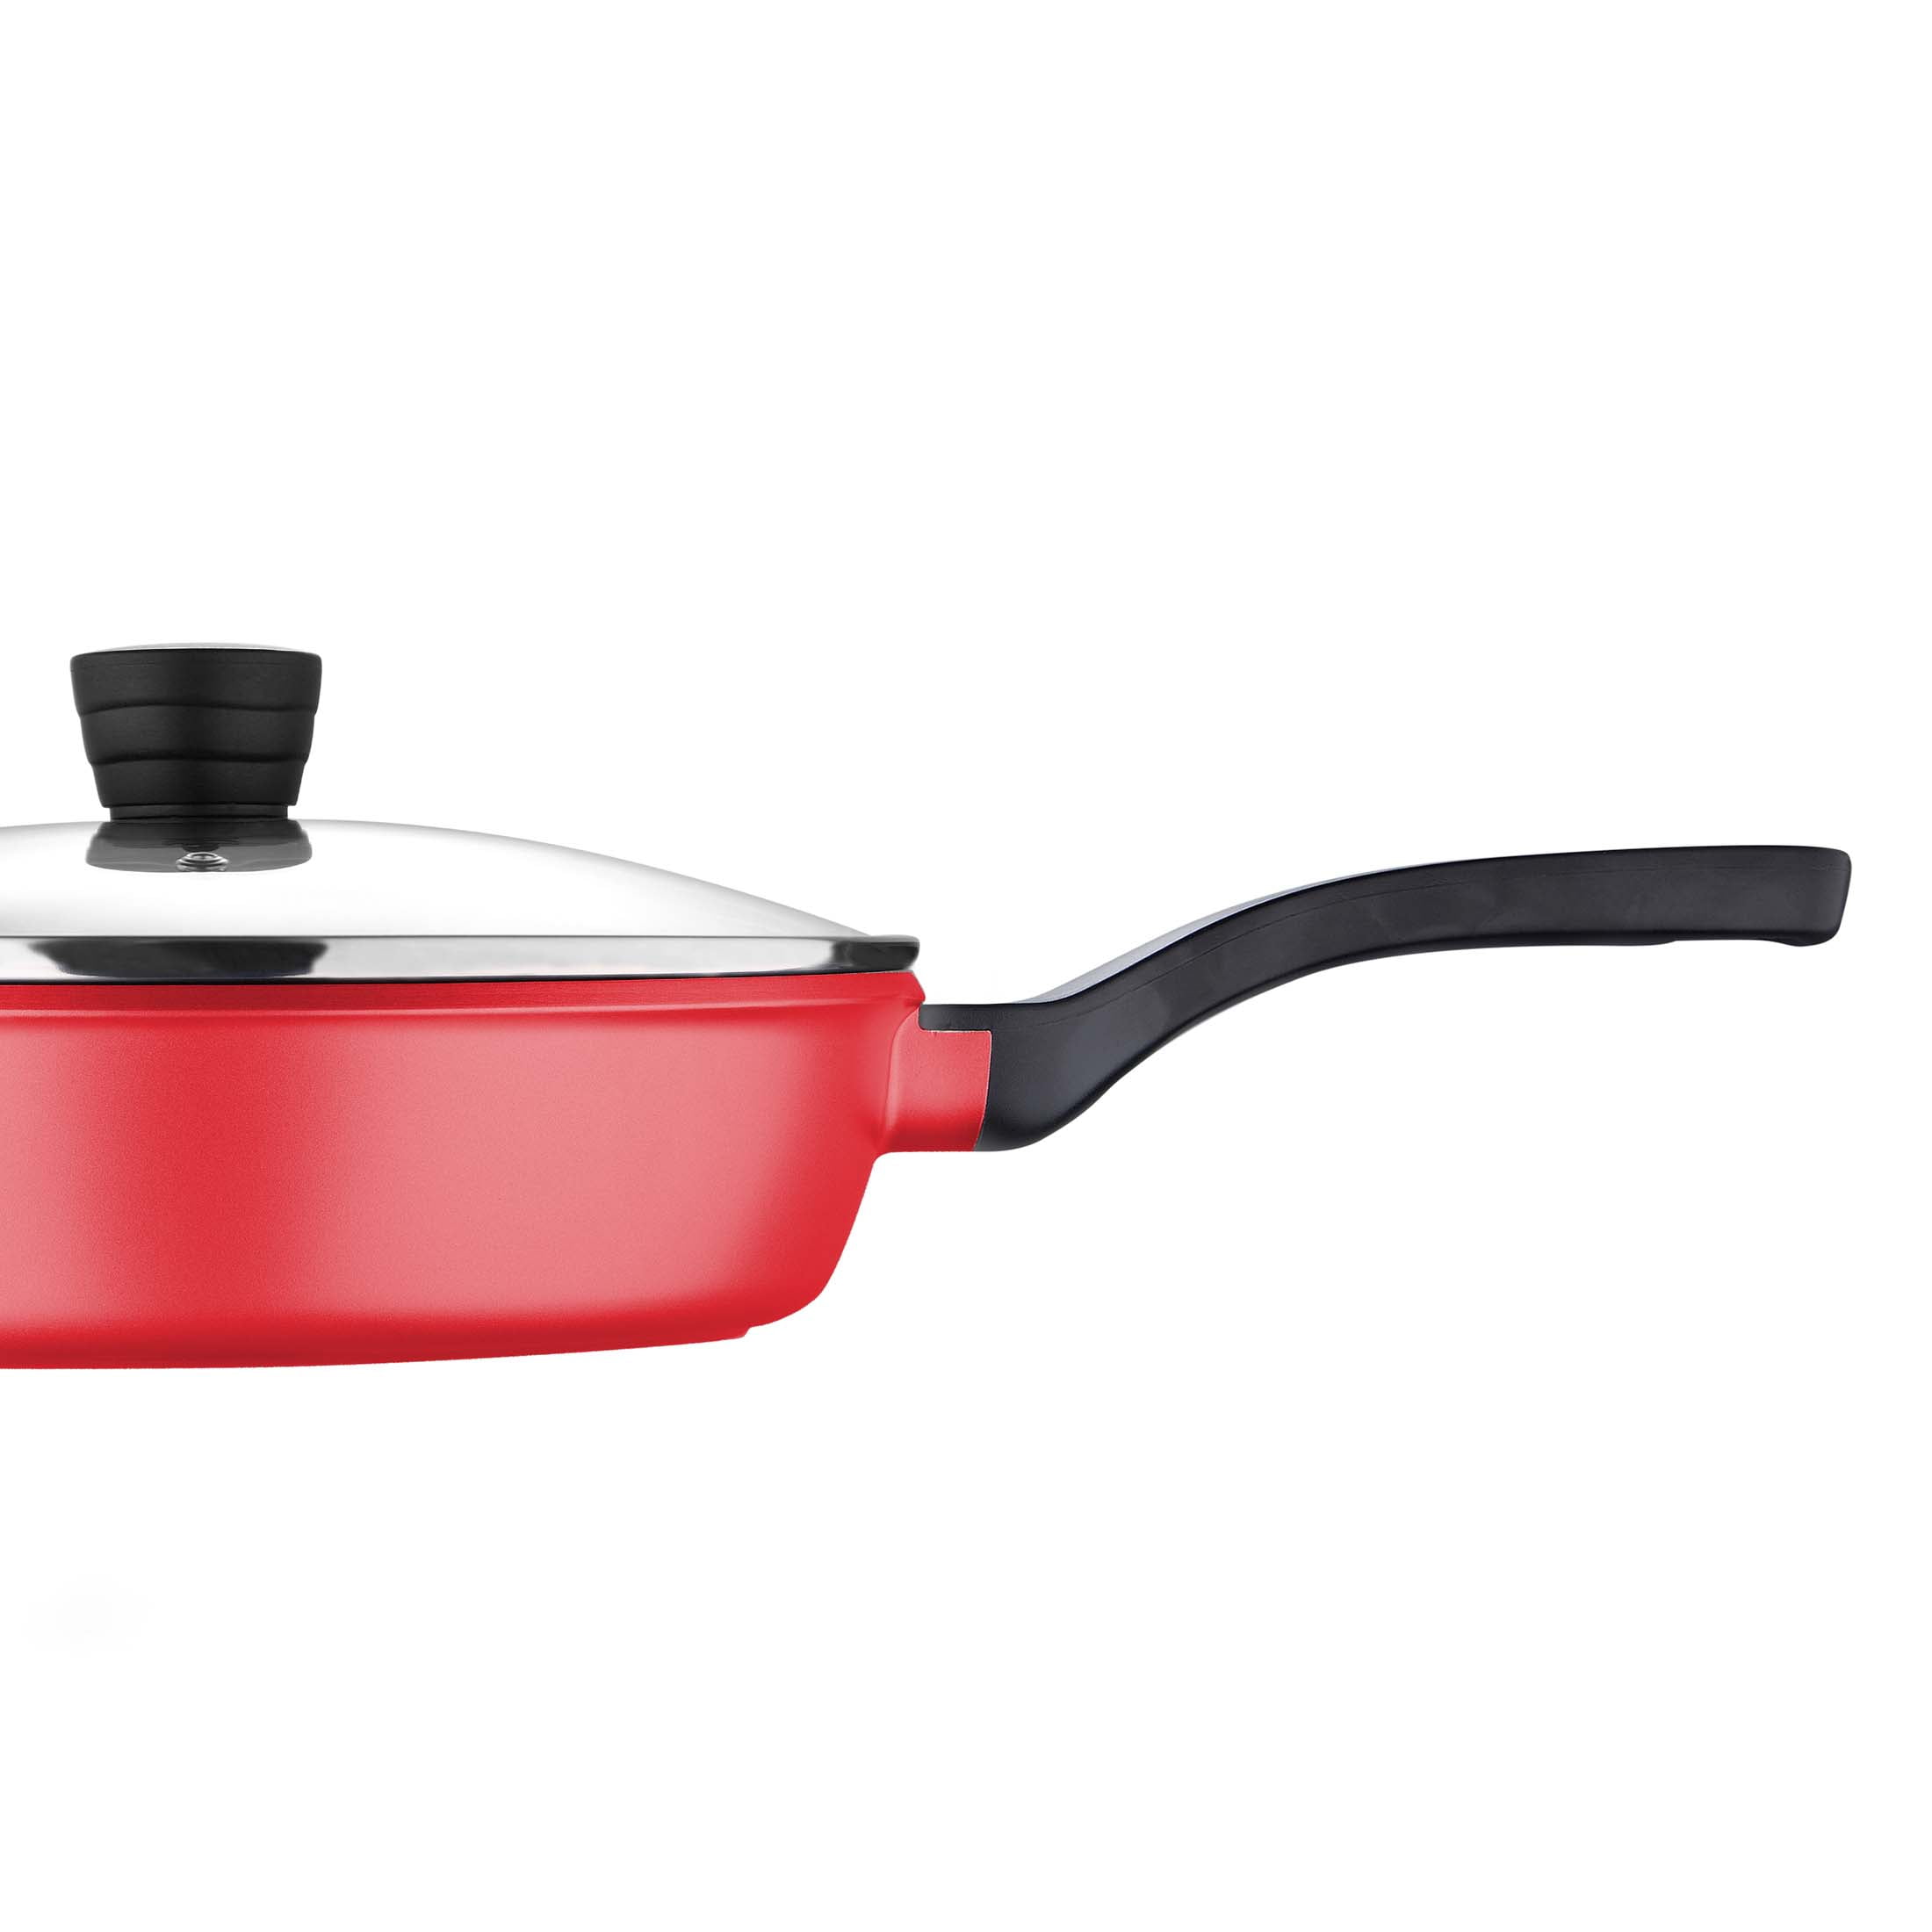 Bergner - Retro Cookware - Pots and Pans Set Nonstick - Induction Cookware  Suitable for all Stove Types - Dishwasher Safe - Covered Saute Pan - 11/4